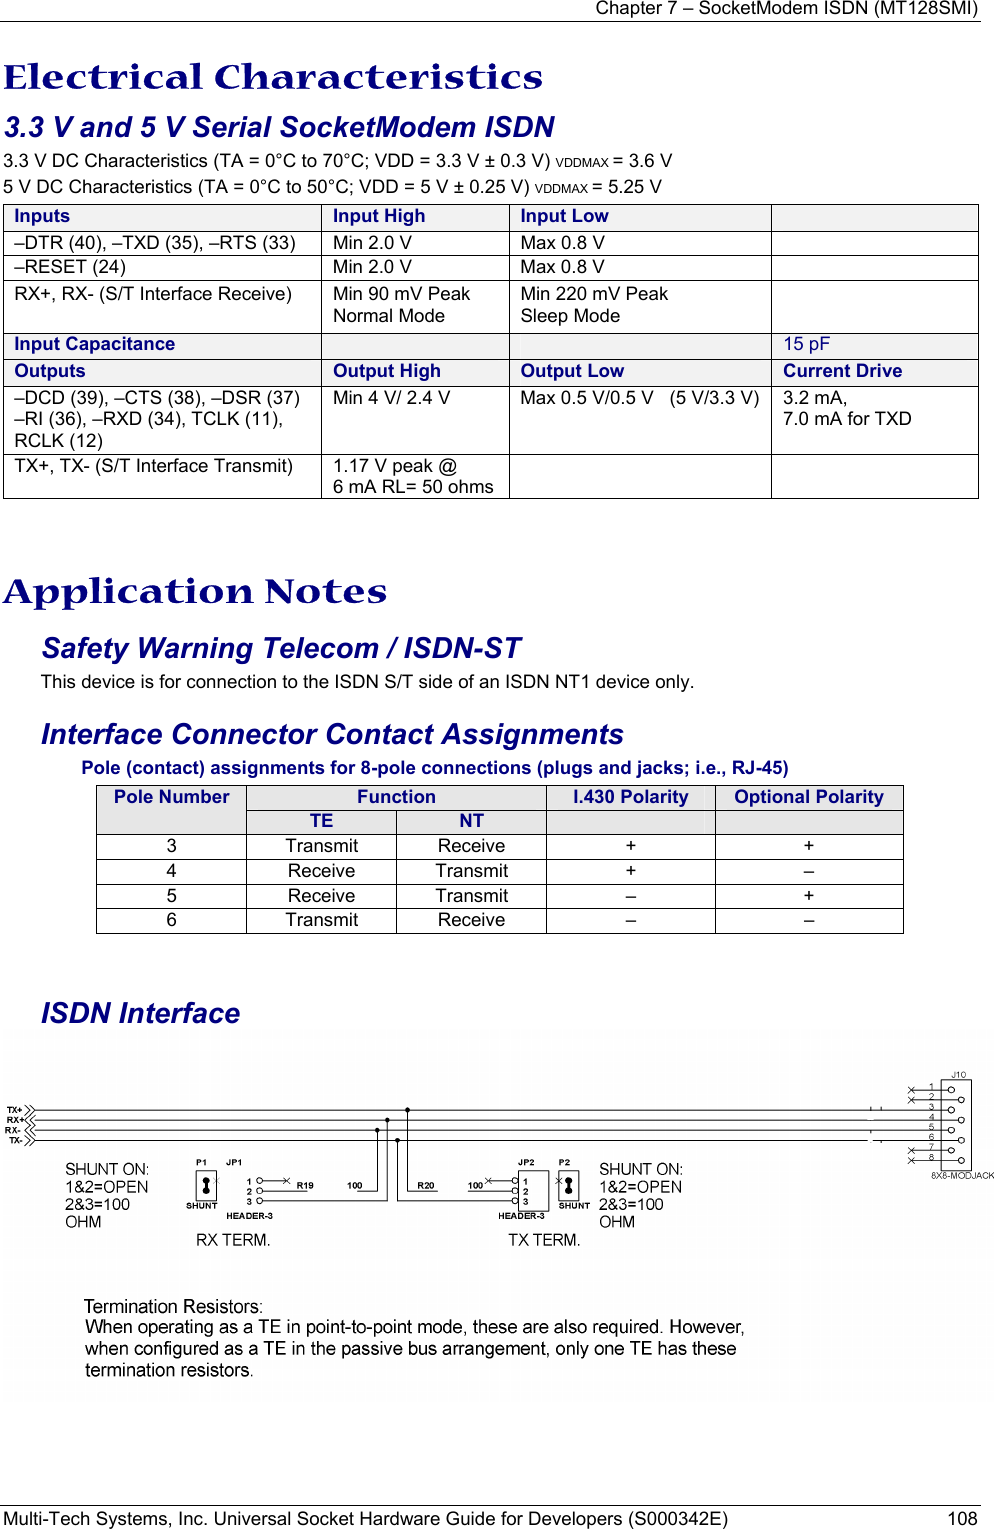 Chapter 7 – SocketModem ISDN (MT128SMI) Multi-Tech Systems, Inc. Universal Socket Hardware Guide for Developers (S000342E)  108 Electrical Characteristics 3.3 V and 5 V Serial SocketModem ISDN 3.3 V DC Characteristics (TA = 0°C to 70°C; VDD = 3.3 V ± 0.3 V) VDDMAX = 3.6 V 5 V DC Characteristics (TA = 0°C to 50°C; VDD = 5 V ± 0.25 V) VDDMAX = 5.25 V Inputs    Input High Input Low  –DTR (40), –TXD (35), –RTS (33)  Min 2.0 V  Max 0.8 V   –RESET (24)  Min 2.0 V  Max 0.8 V    RX+, RX- (S/T Interface Receive)  Min 90 mV Peak   Normal Mode Min 220 mV Peak Sleep Mode  Input Capacitance      15 pF Outputs Output High Output Low Current Drive –DCD (39), –CTS (38), –DSR (37)  –RI (36), –RXD (34), TCLK (11), RCLK (12) Min 4 V/ 2.4 V  Max 0.5 V/0.5 V   (5 V/3.3 V)  3.2 mA,  7.0 mA for TXD TX+, TX- (S/T Interface Transmit)  1.17 V peak @  6 mA RL= 50 ohms     Application Notes Safety Warning Telecom / ISDN-ST This device is for connection to the ISDN S/T side of an ISDN NT1 device only. Interface Connector Contact Assignments                Pole (contact) assignments for 8-pole connections (plugs and jacks; i.e., RJ-45) Function  I.430 Polarity  Optional Polarity Pole Number TE  NT     3 Transmit Receive  +  + 4 Receive Transmit  +  – 5 Receive Transmit  –  + 6 Transmit Receive  –  –   ISDN Interface   